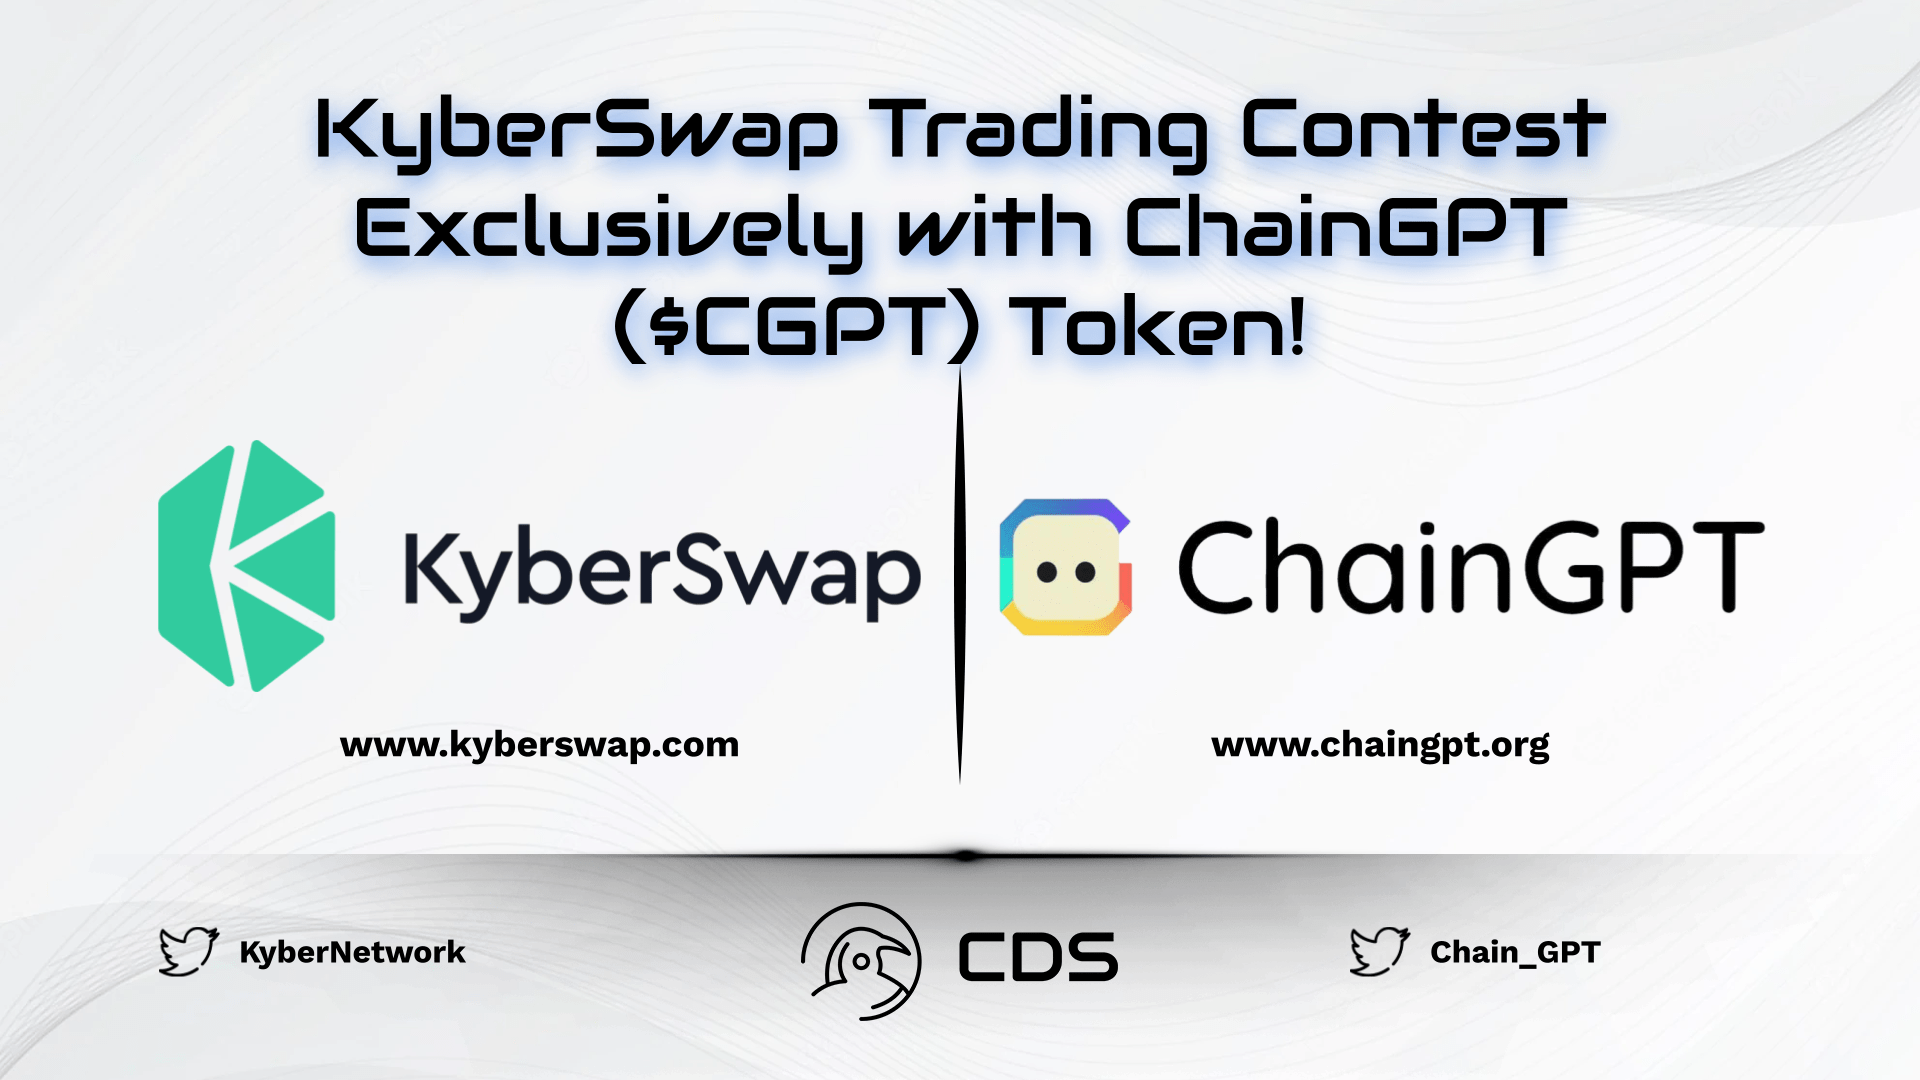 KyberSwap Trading Contest Exclusively with ChainGPT ($CGPT) Token!